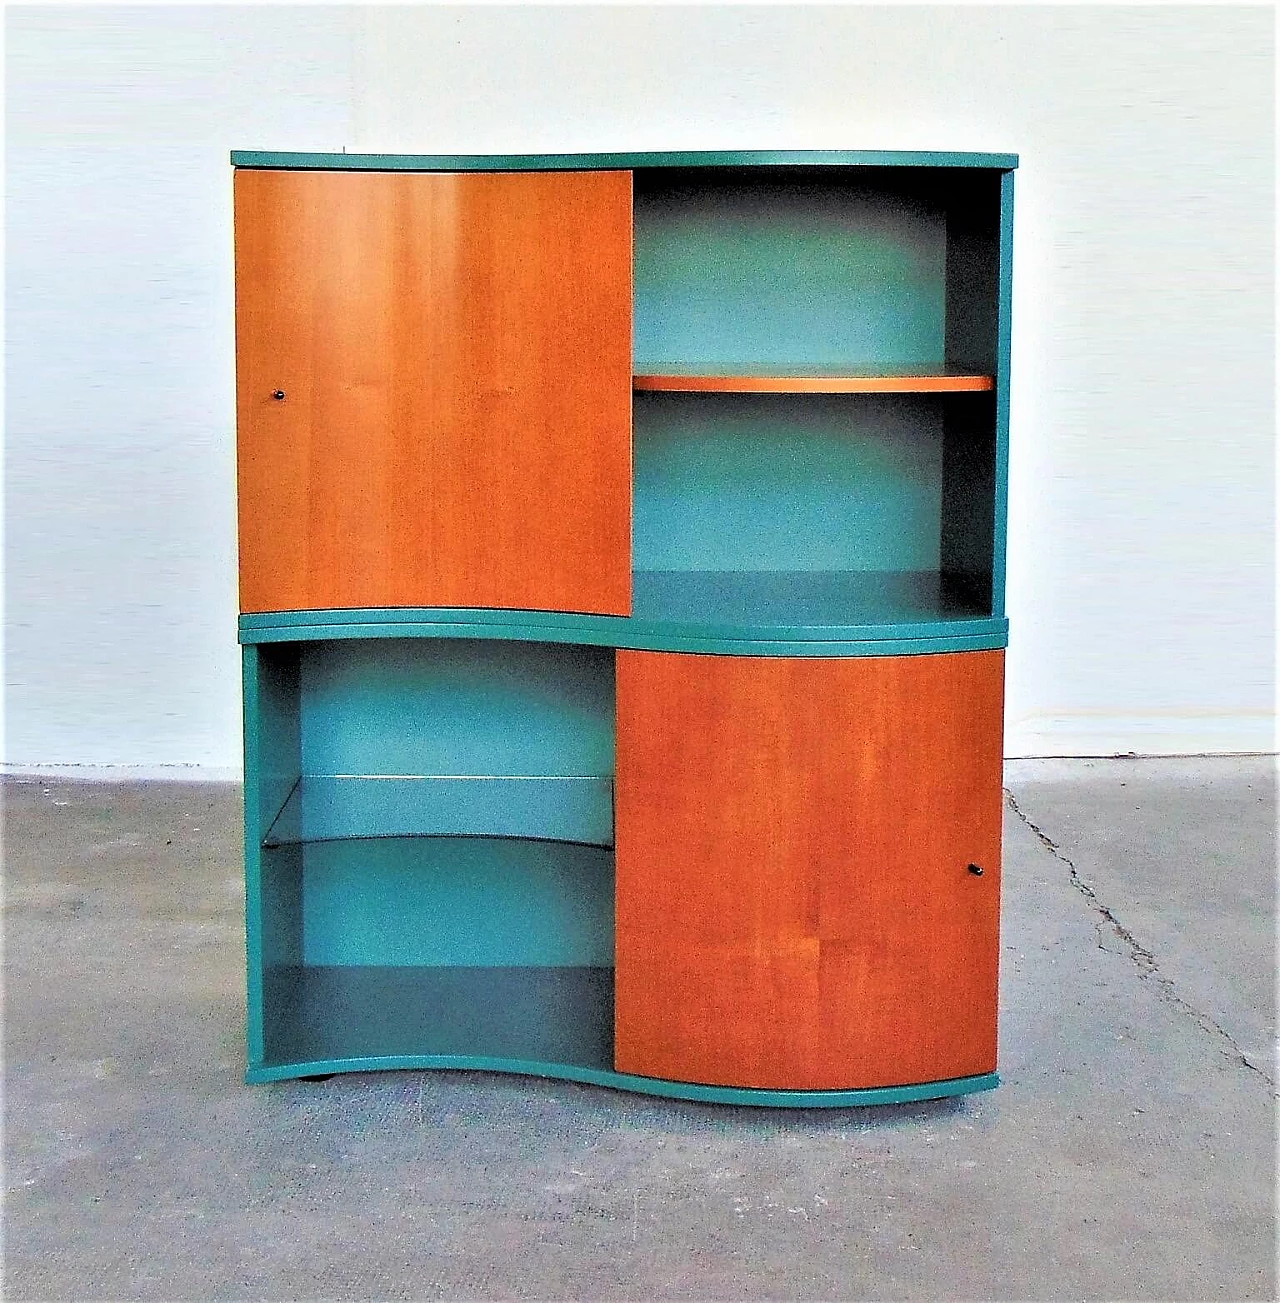 Sideboard Green Satin Lacquer, Doors in Walnut-Stained Cherry, for Roche Bobois, 1990s 1167287